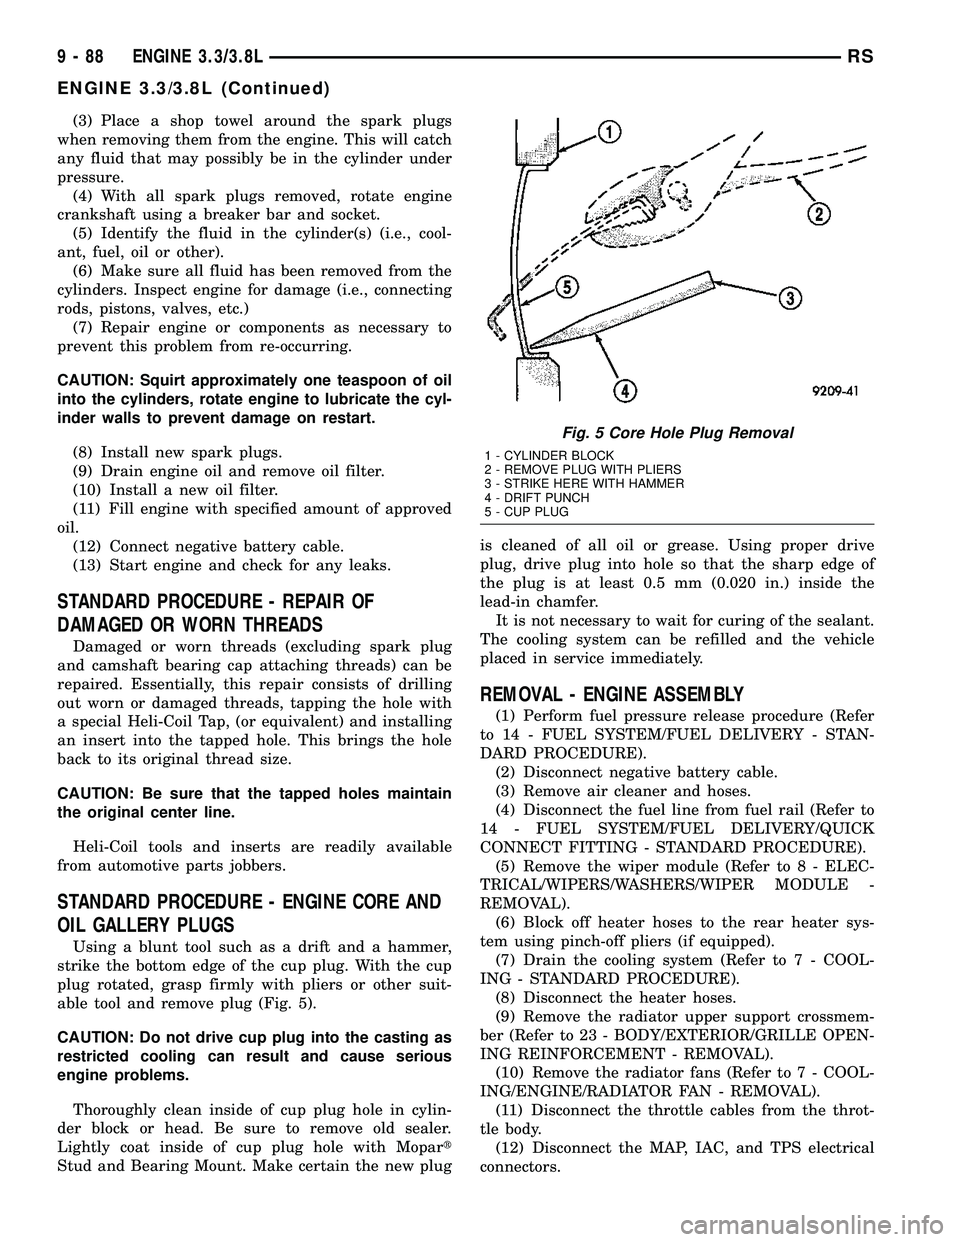 CHRYSLER VOYAGER 2005  Service Manual (3) Place a shop towel around the spark plugs
when removing them from the engine. This will catch
any fluid that may possibly be in the cylinder under
pressure.
(4) With all spark plugs removed, rotat